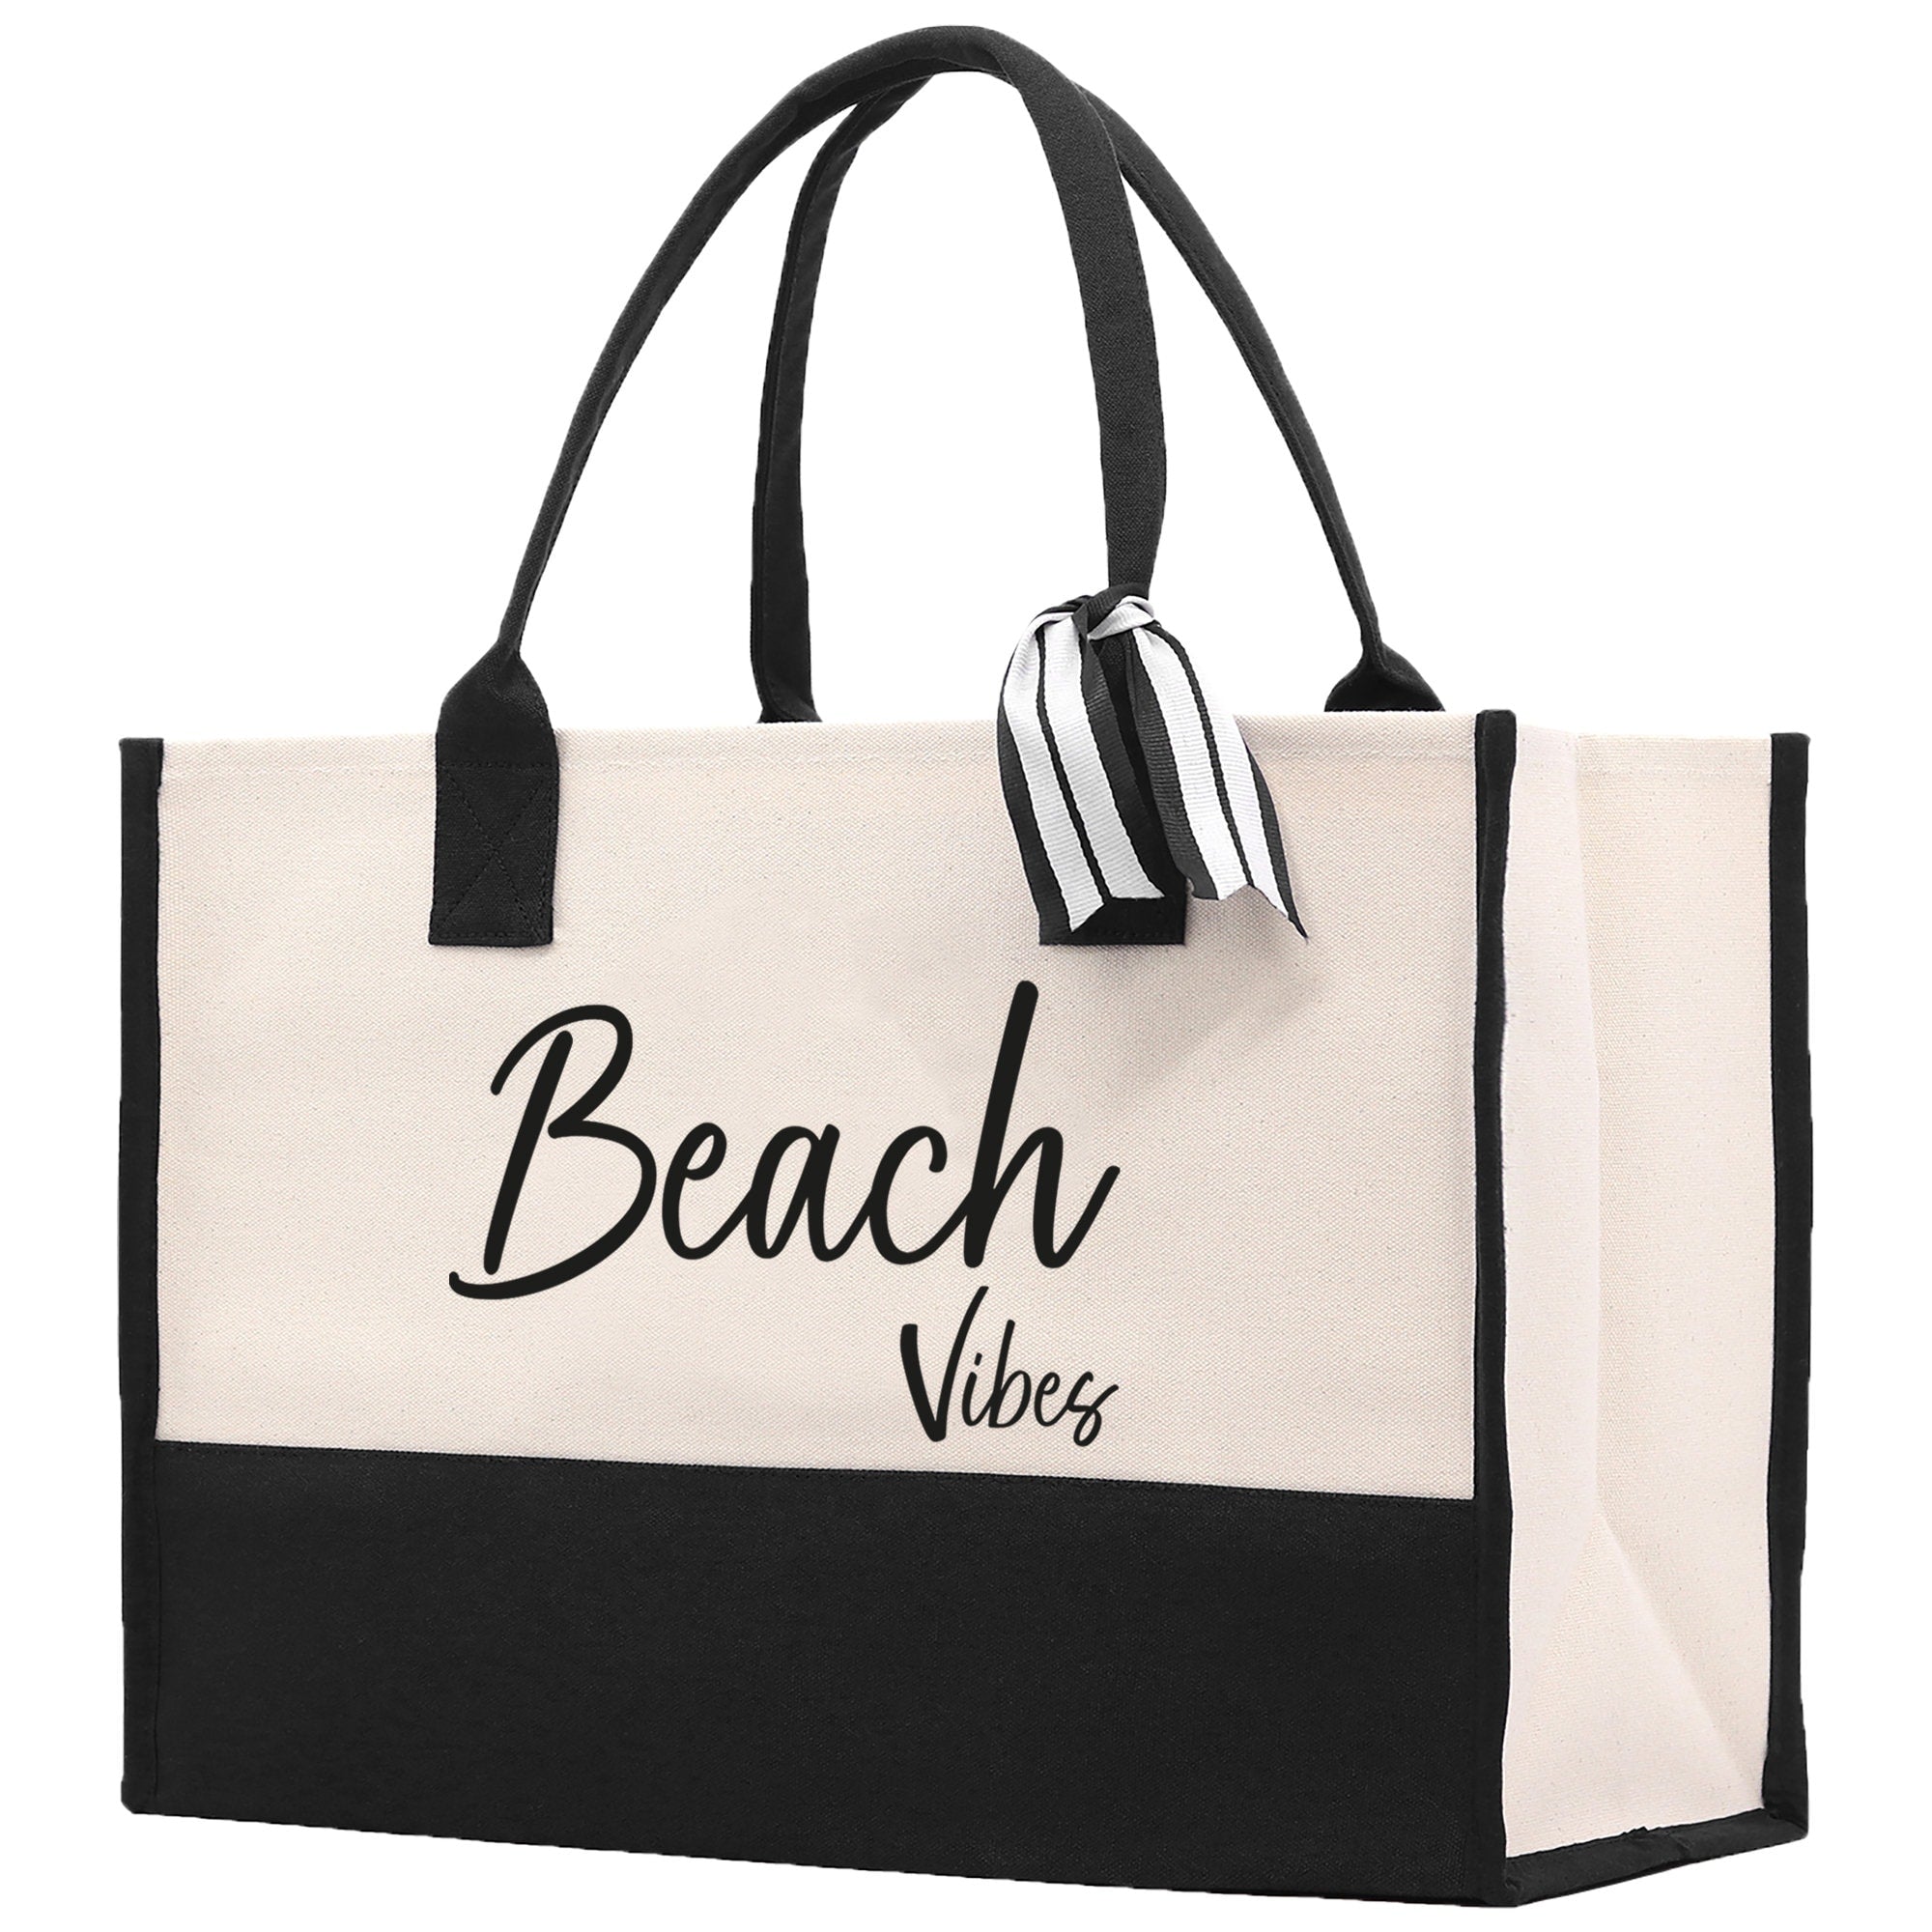 Beach Vibes Canvas Tote Bag Birthday Gift for Her Weekender Tote Bag Beach Tote Bag Large Beach Tote Bag